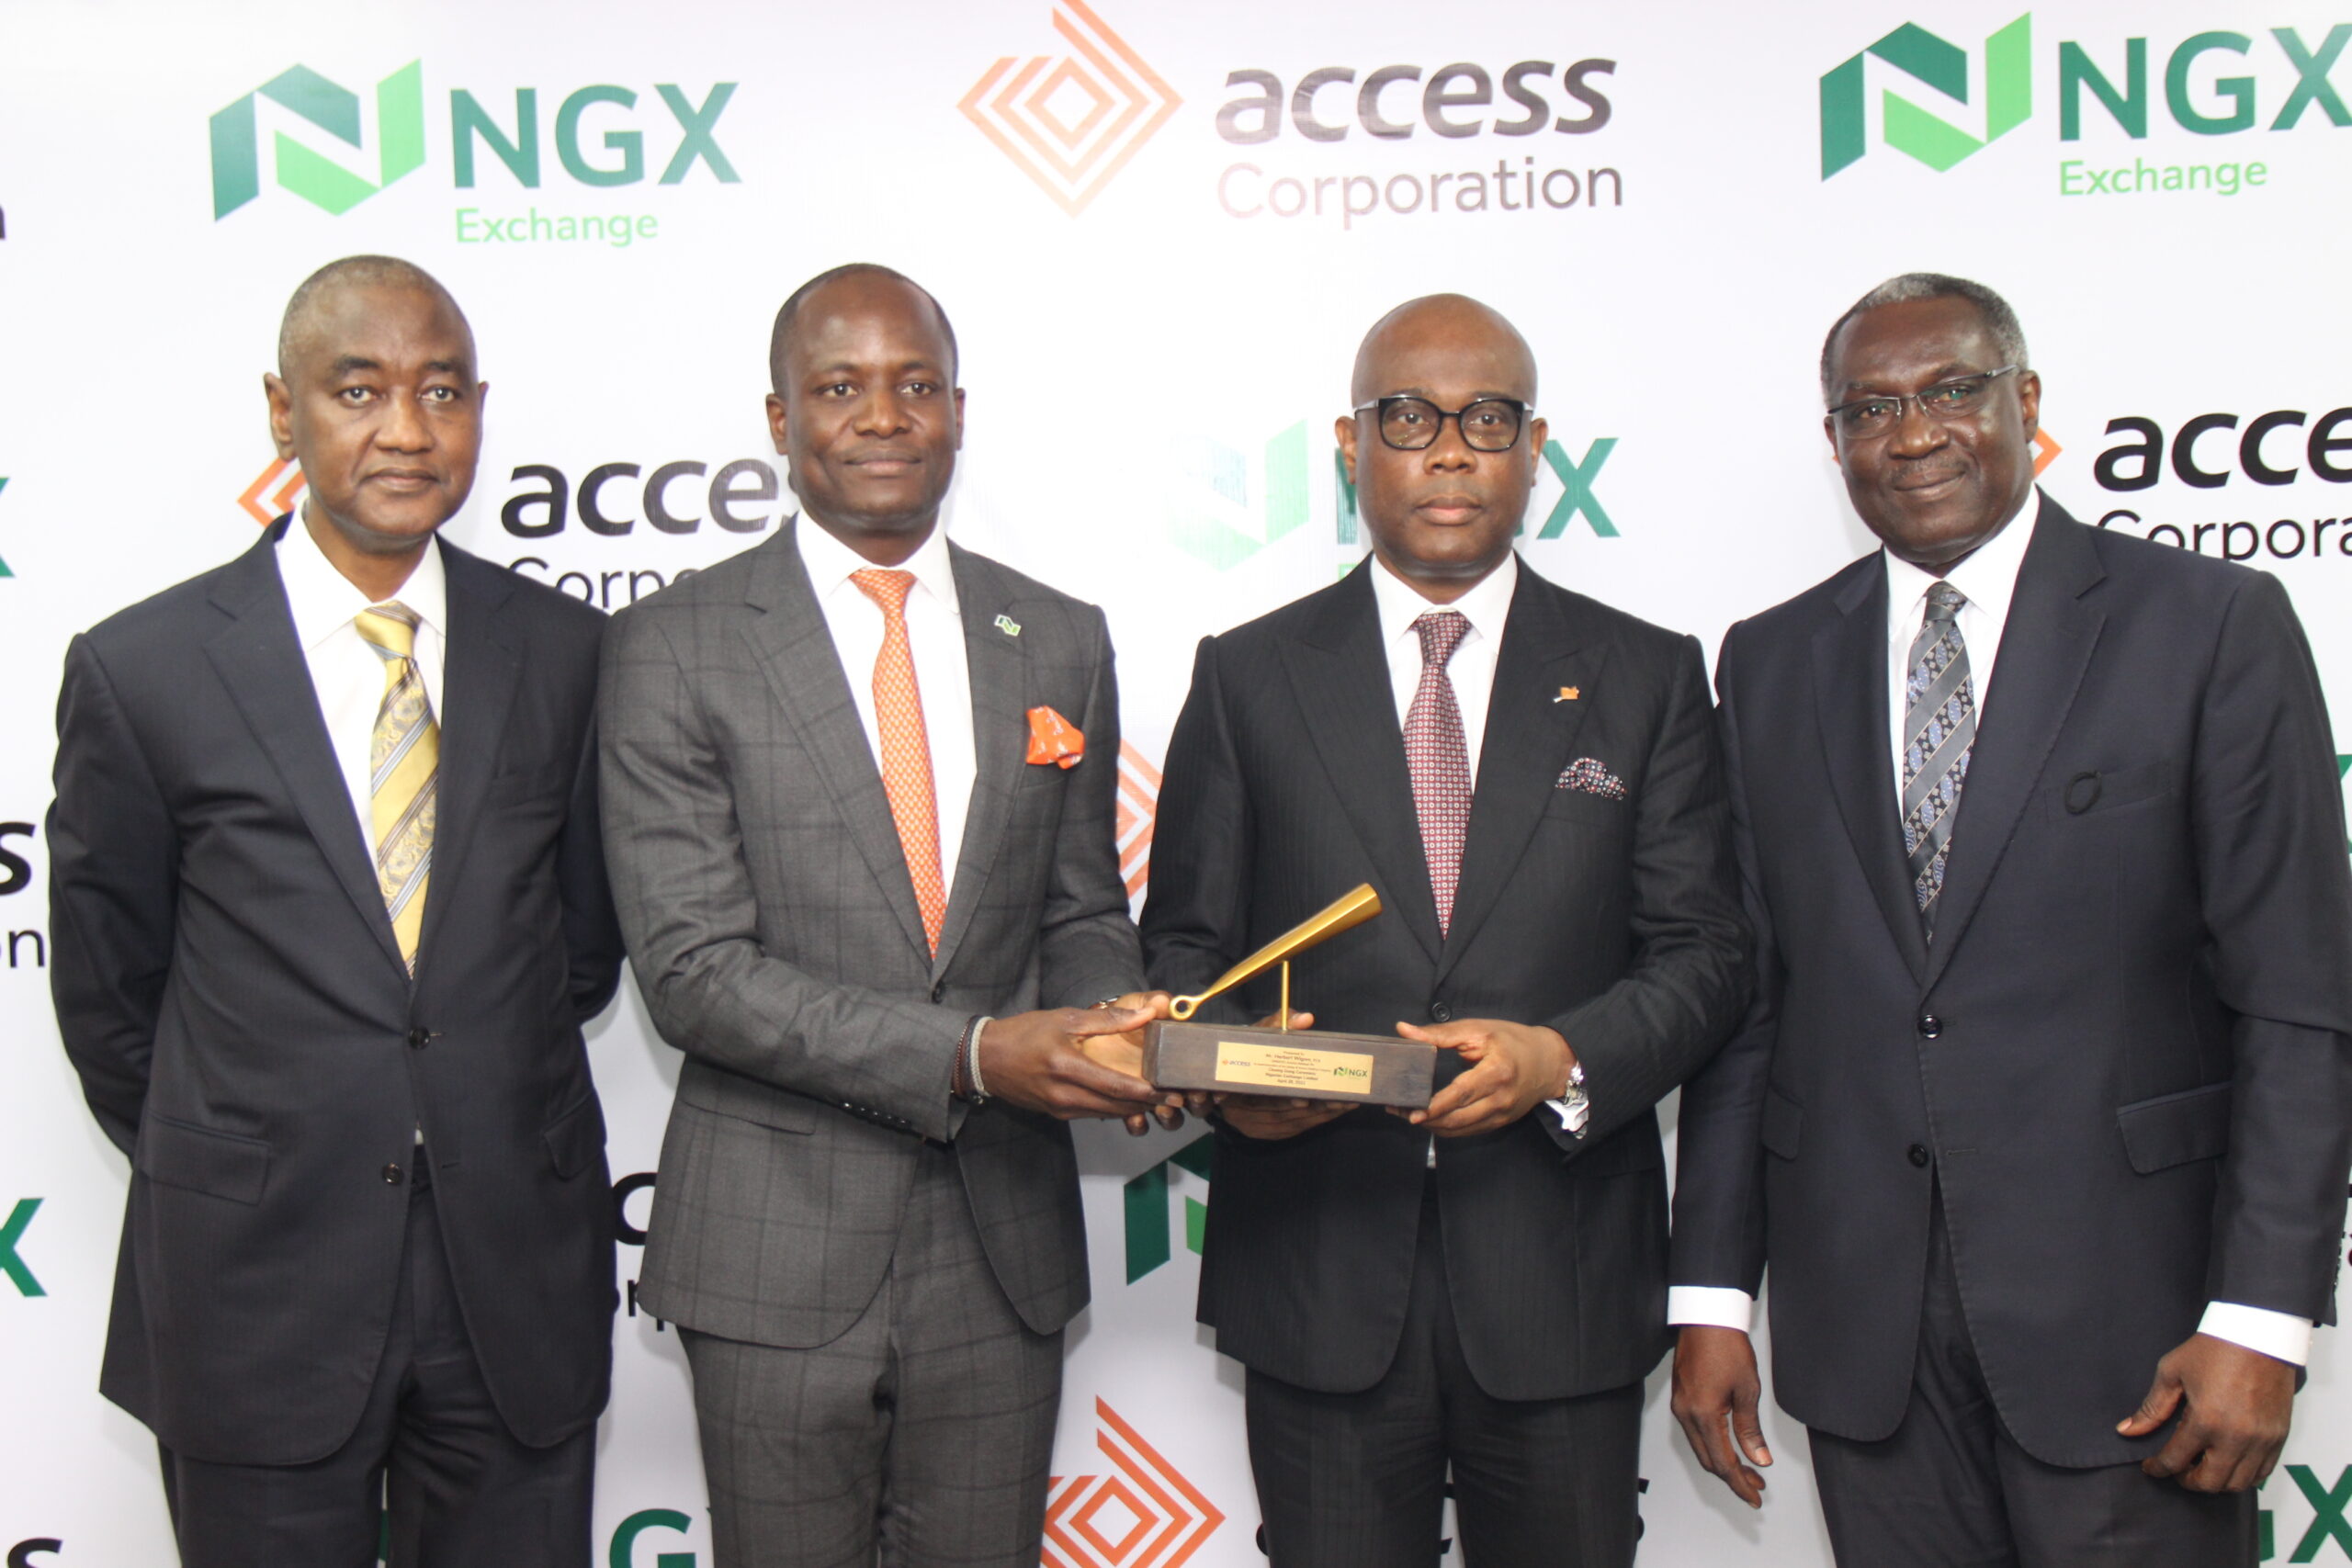 Photos: Closing Gong Ceremony To Commemorate Restructuring, Listing Of Access Holdings Plc